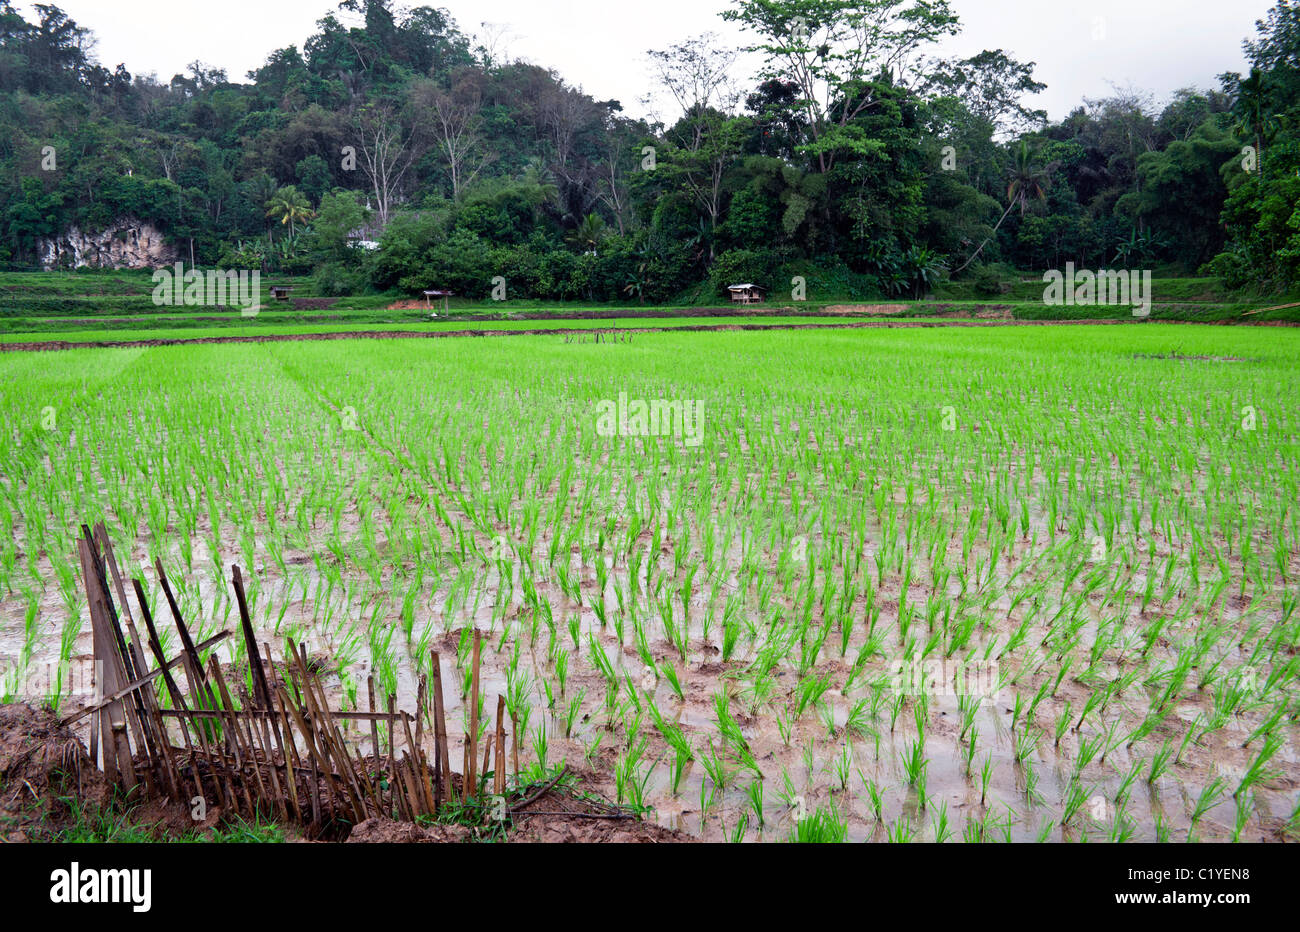 Green rice terrace plantation in indonesian countryside Stock Photo